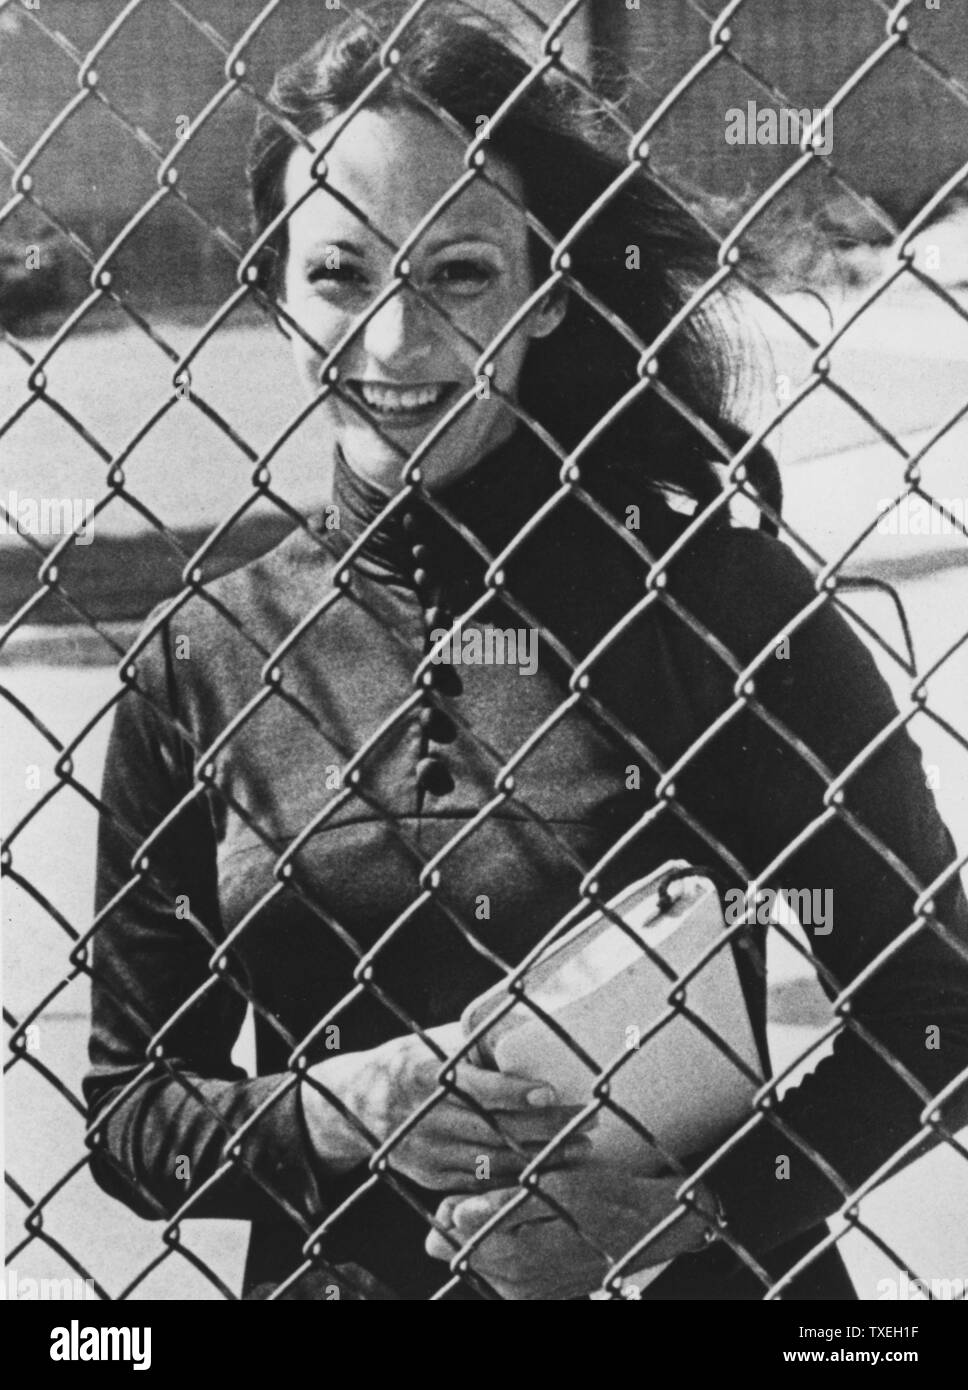 A photo taken of Miss Susan Atkins, convicted mass murderer, and once a member of the Charles Manson 'family'. She stands behind the fenced-in women's prison on August 20, 1981. She got married to self-described millionaire Donald Lee Baisure on September 2, 1981 in Frontera, CA. He turned out not be a millionaire at all and had been married 35 times already. She had the marriage annuled. (UPI Photo/Rich Lipski/Files) Stock Photo